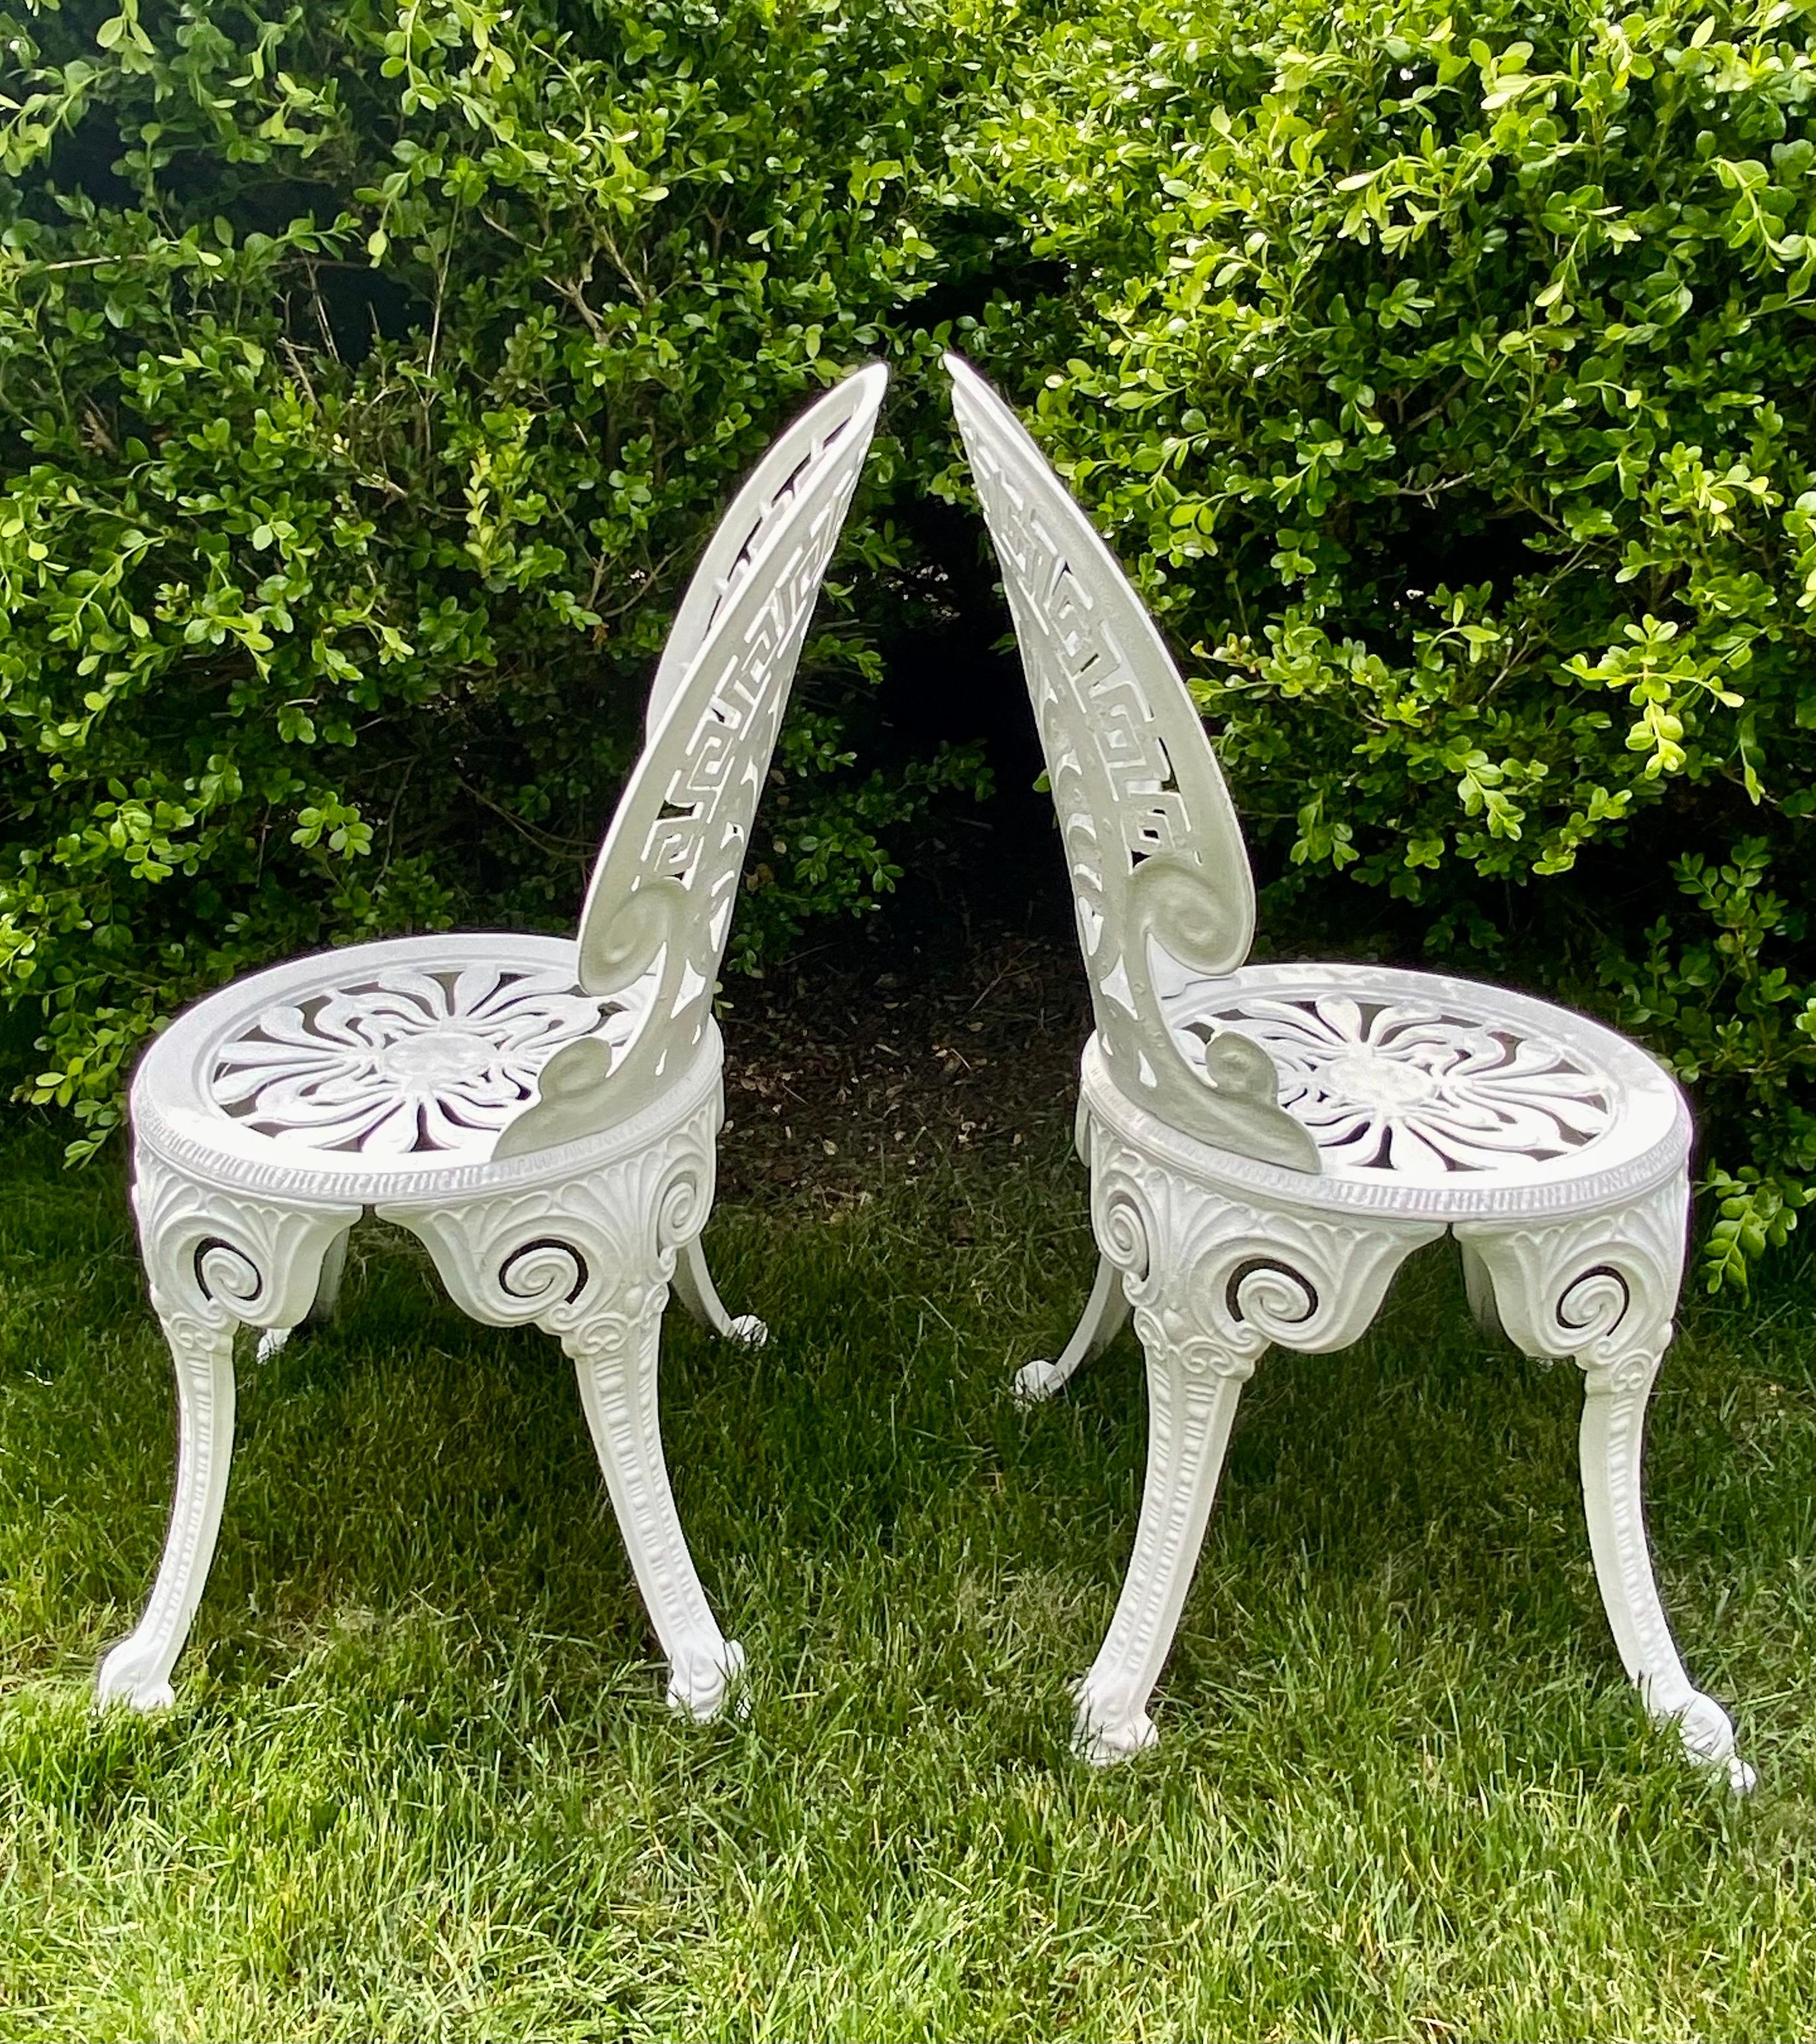 Pair of Hollywood Regency style white aluminum garden chairs with Greek key and fan motifs. These armless side accent chairs are perfect extra seating for the garden or patio. Lightweight, sturdy, and durable.